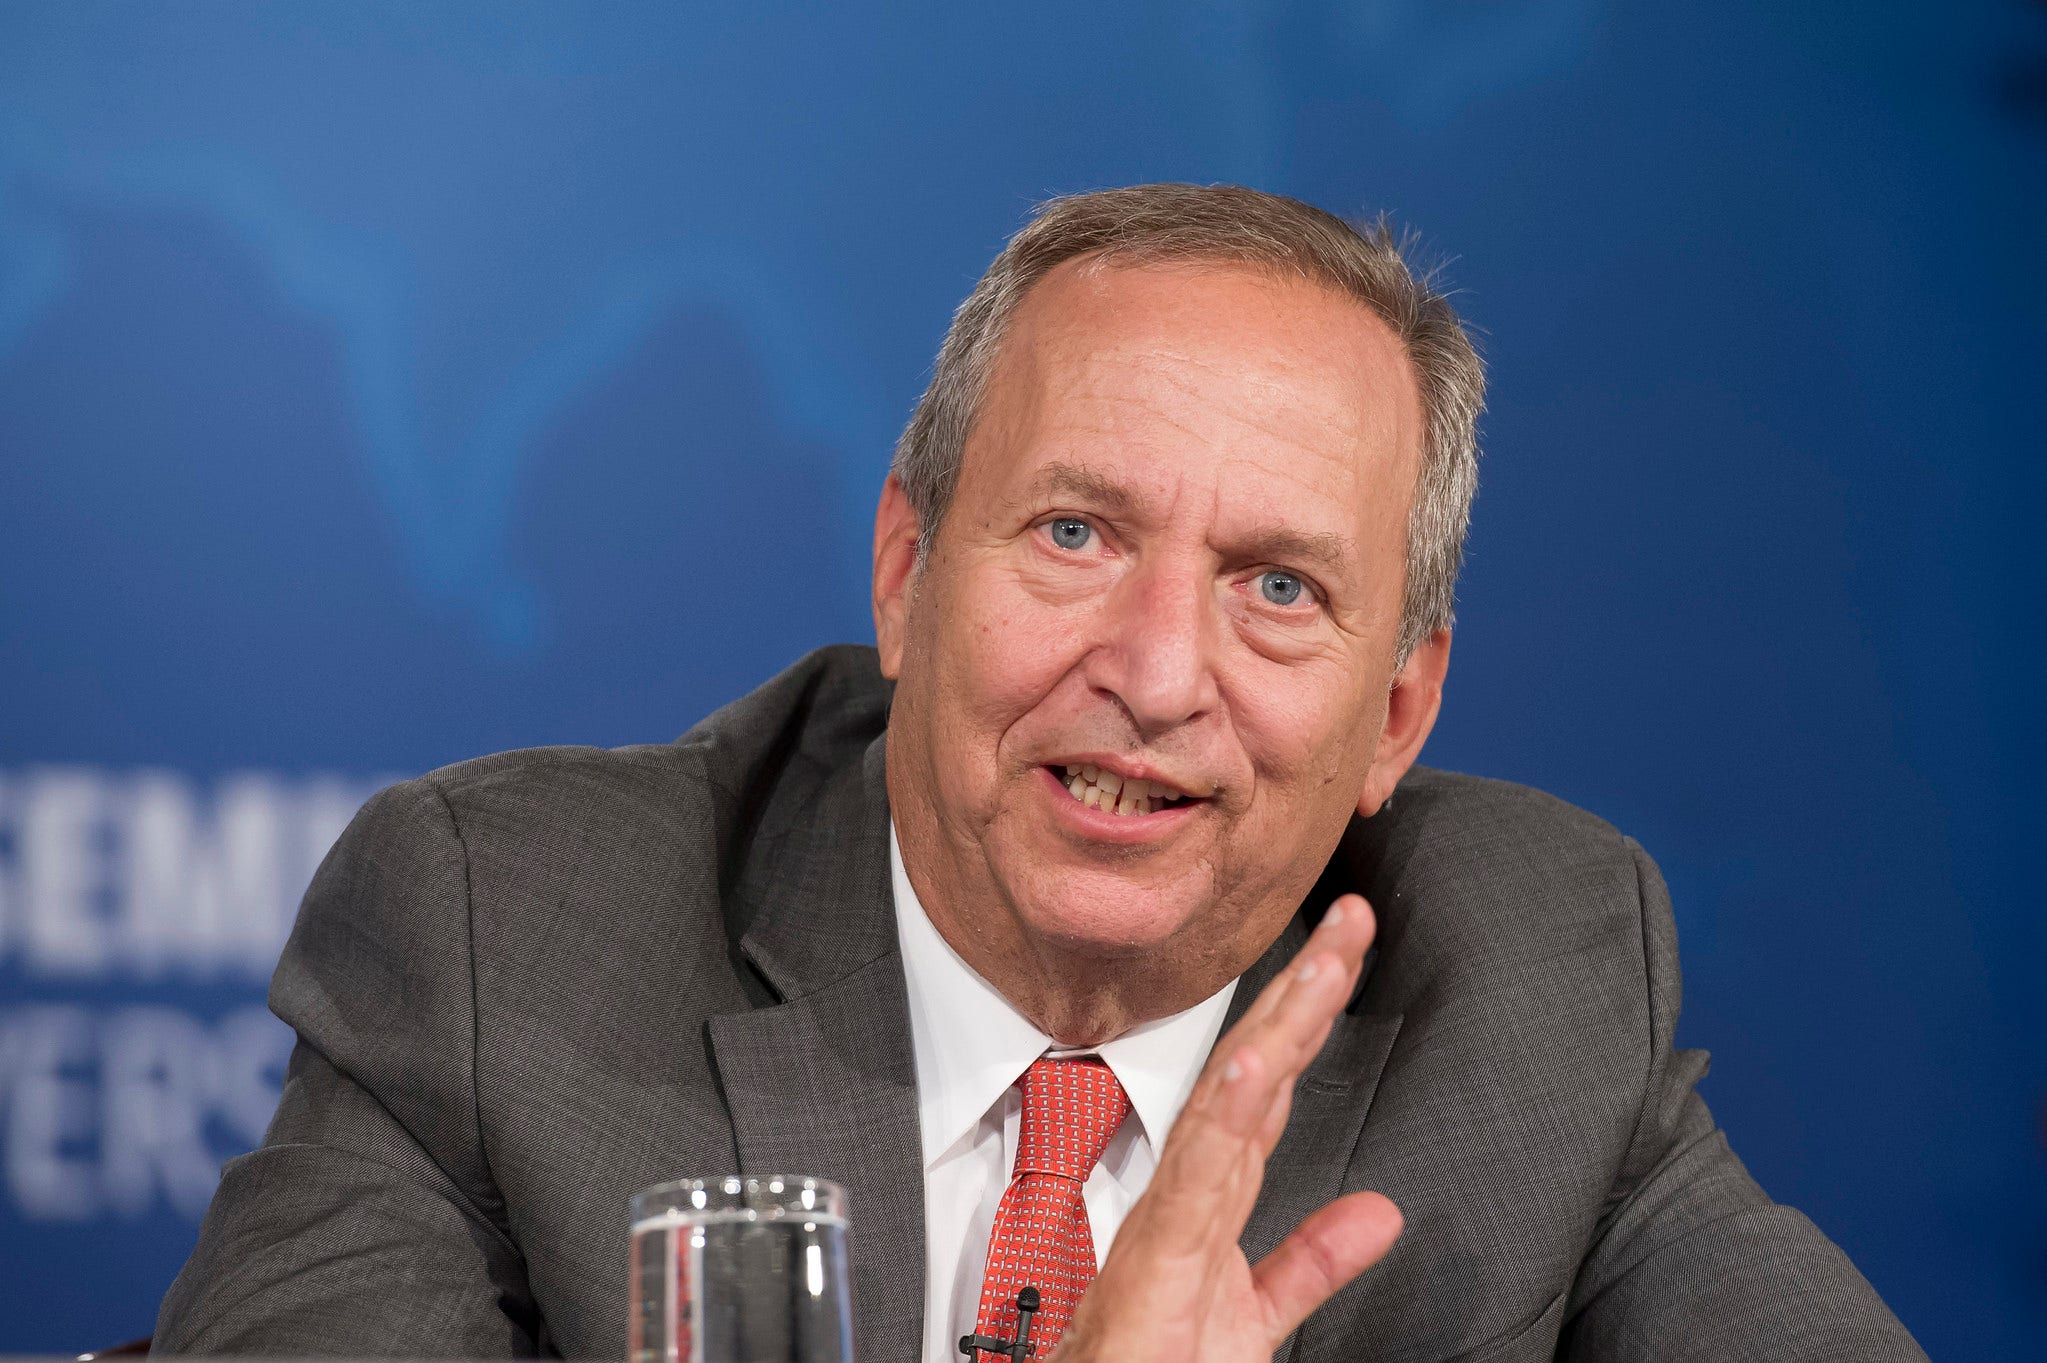 Larry Summers Says Consensus View That Inflation Will Come Way Down Is 'Outside Range Of Normal Historical Experience'